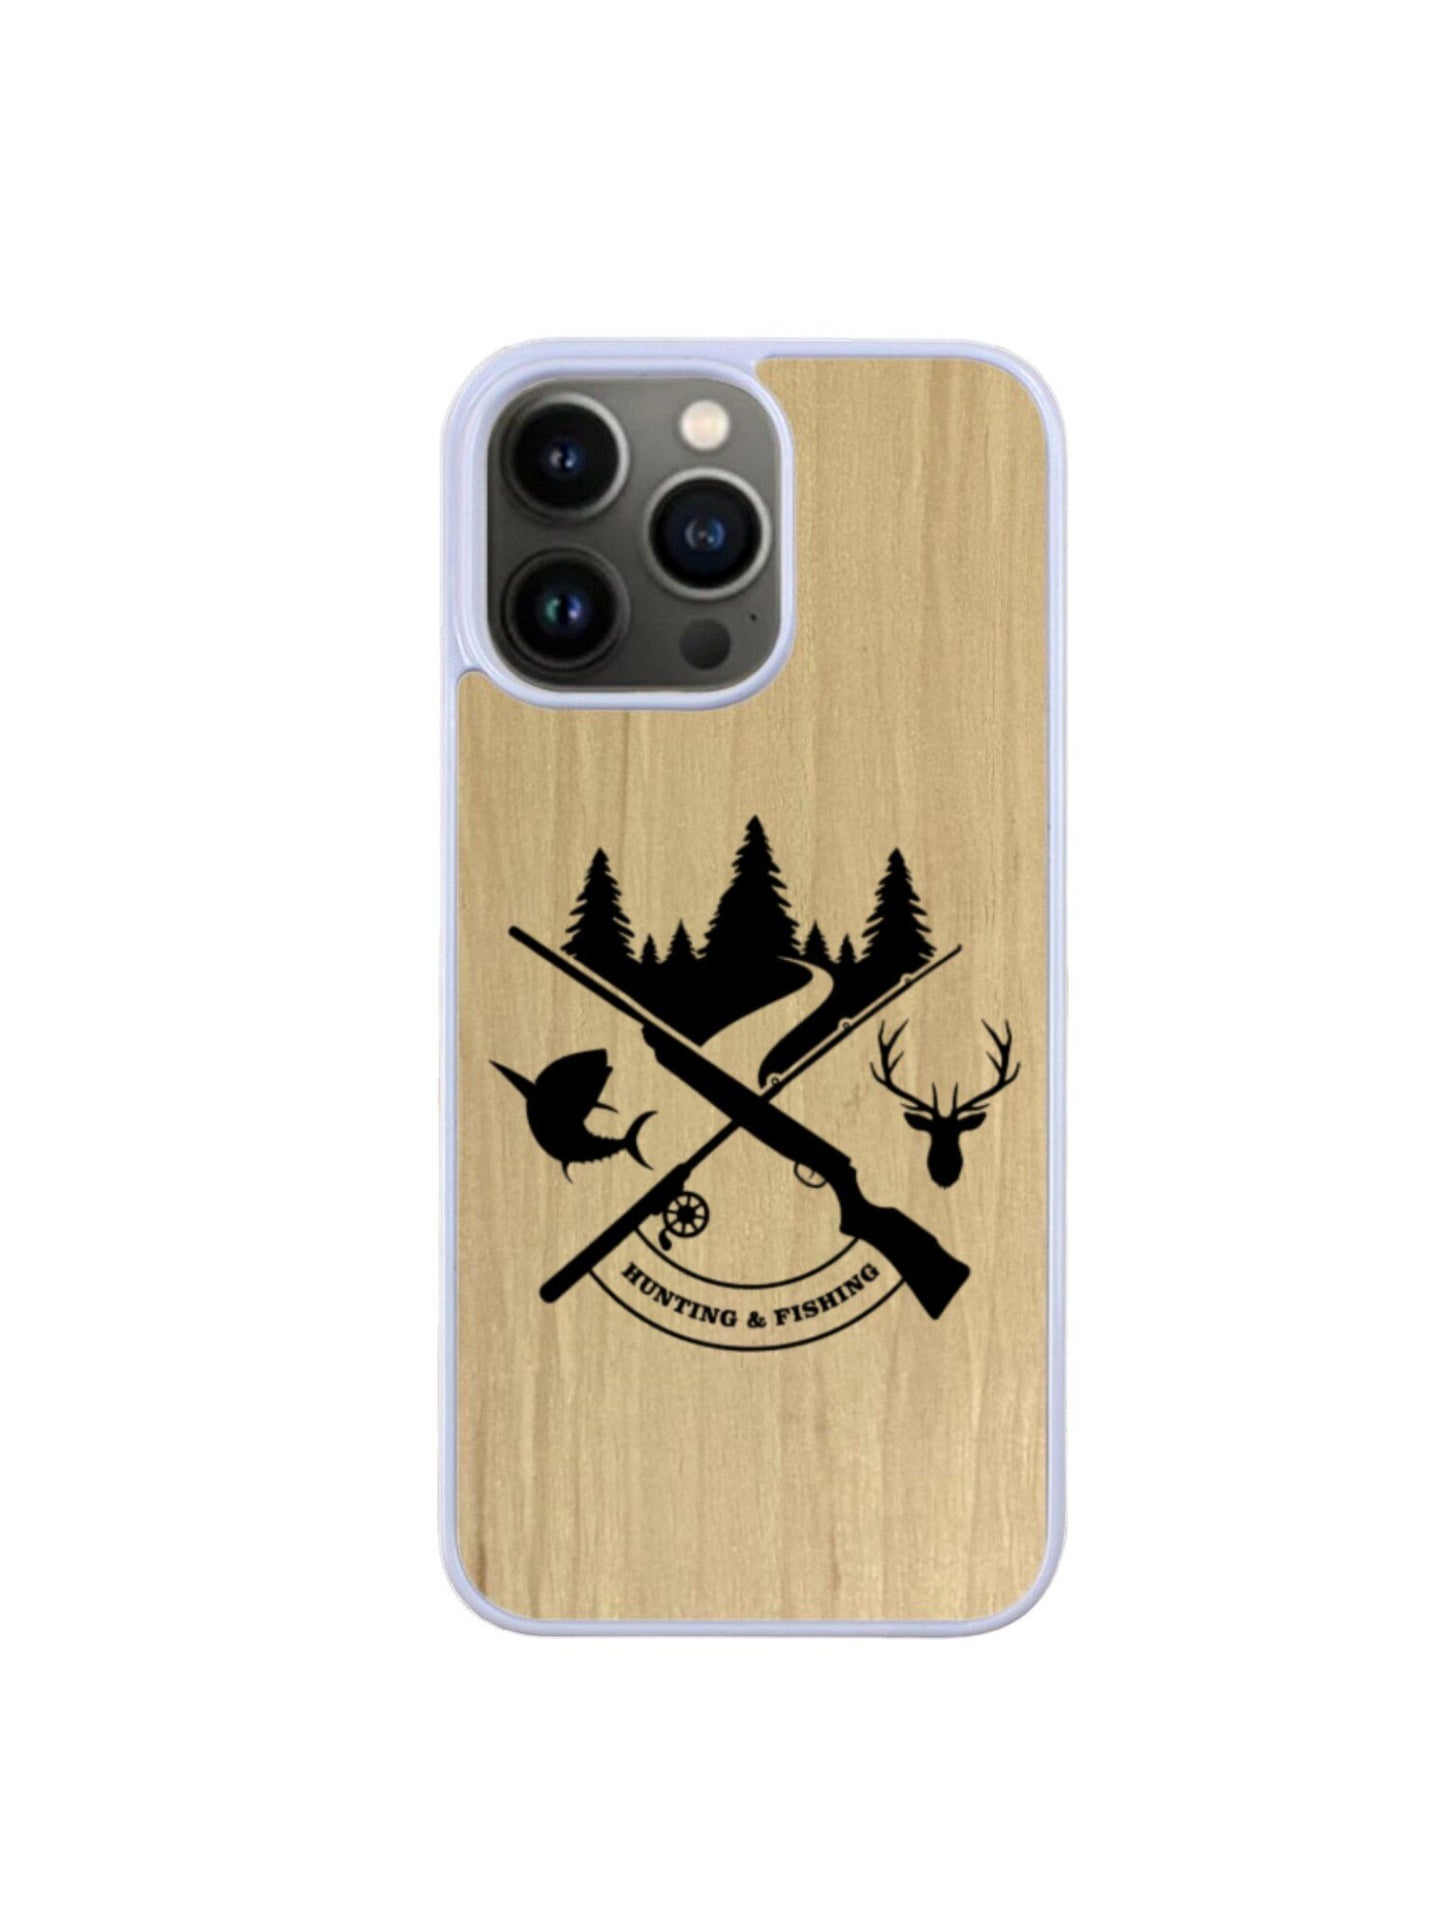 Coque Iphone blanc - Chasse et pêche